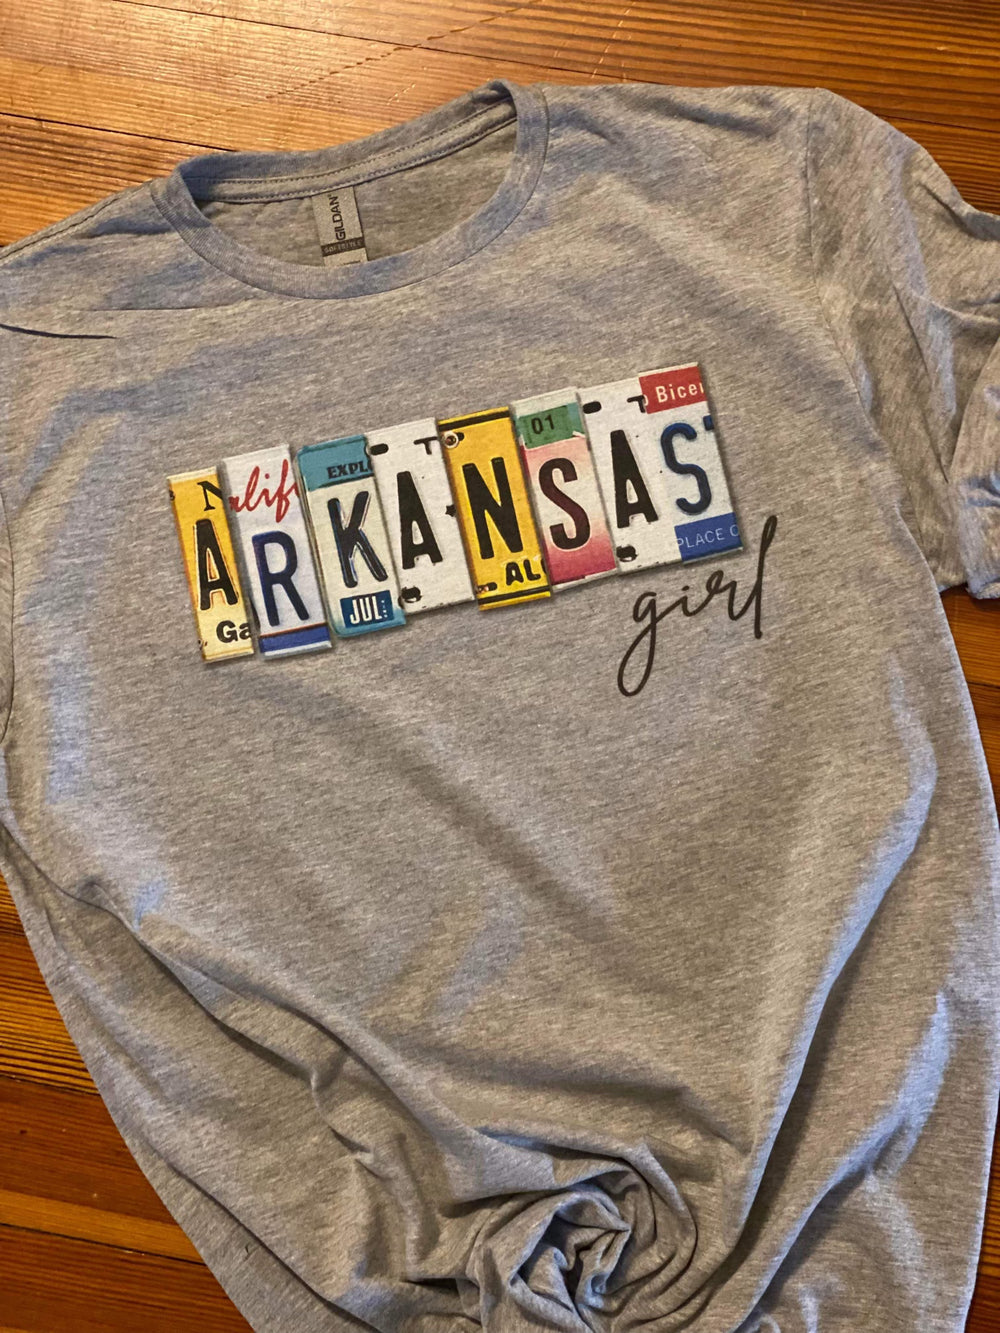 XL only--(NO RETURNS) EXCLUSIVE Arkansas State Plate Tee